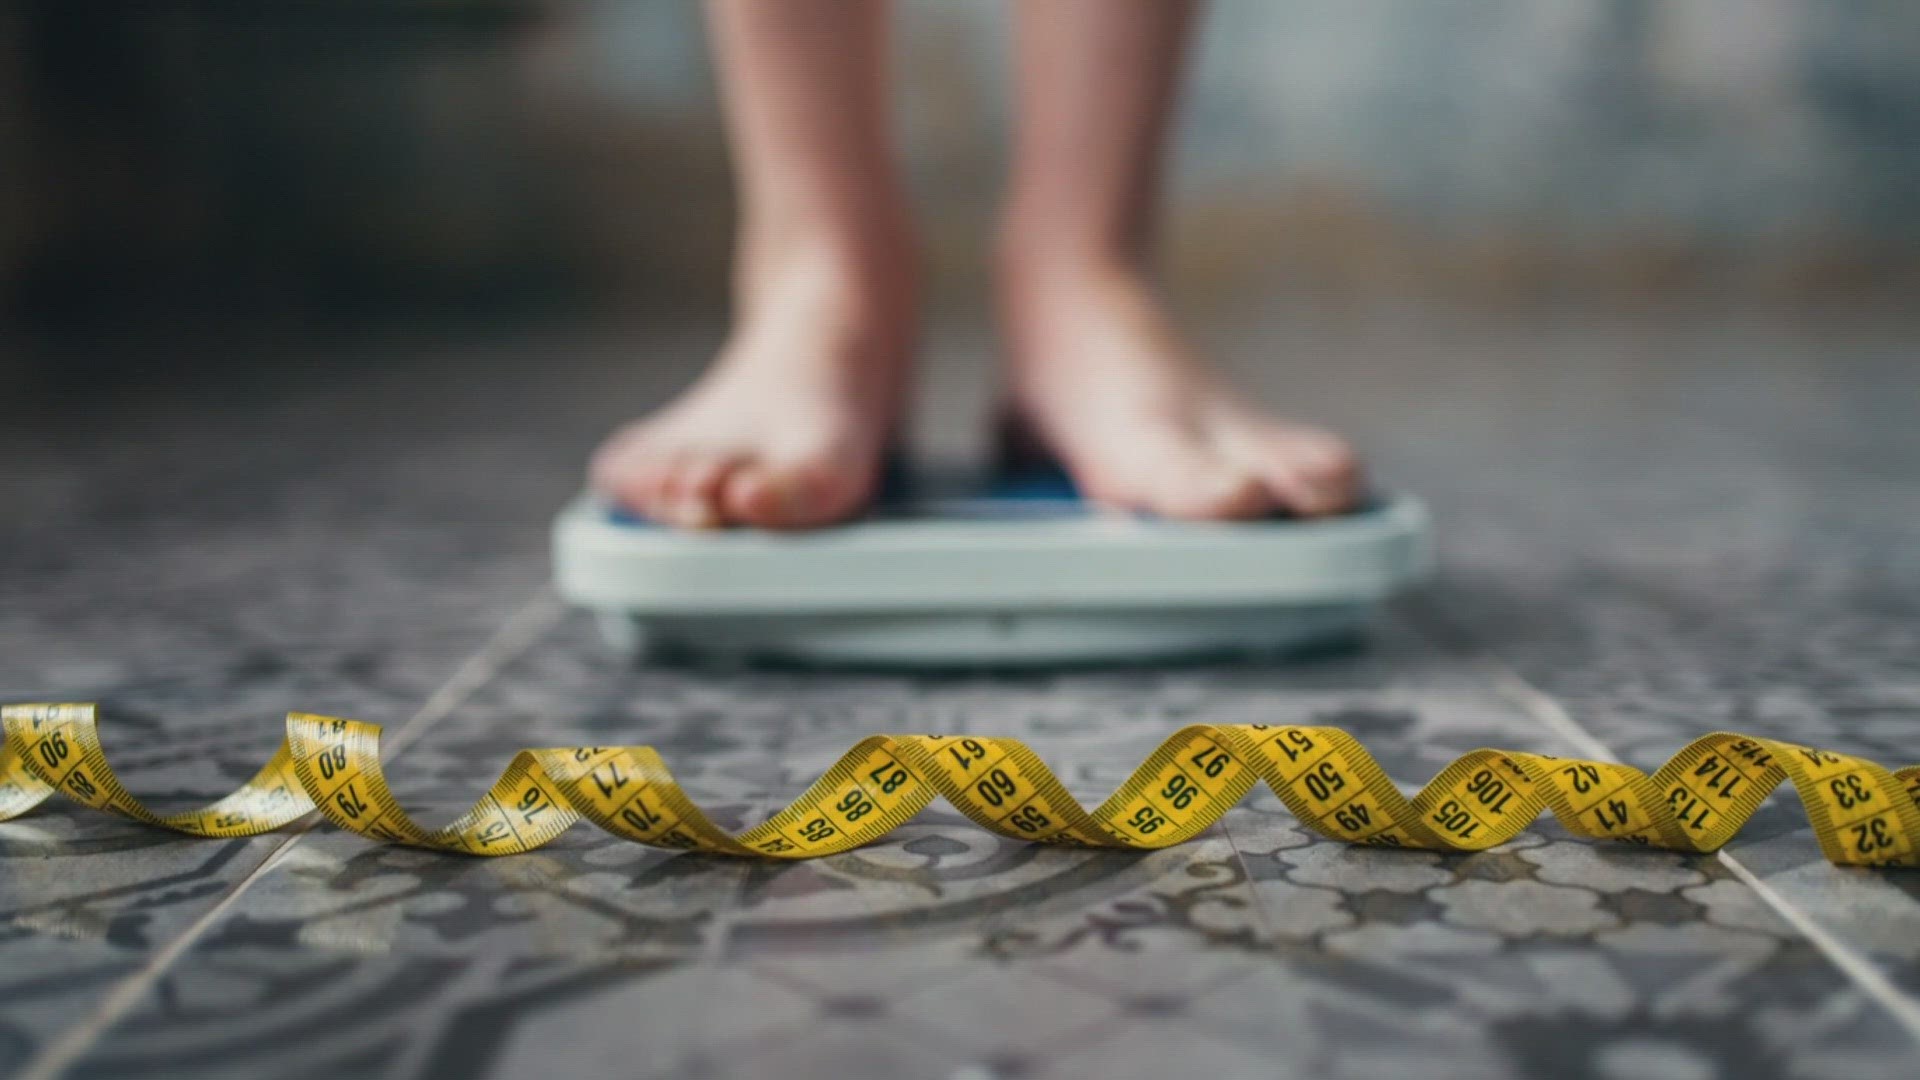 The pandemic ushered in a new era of challenges, among which, was the surge in eating disorders.